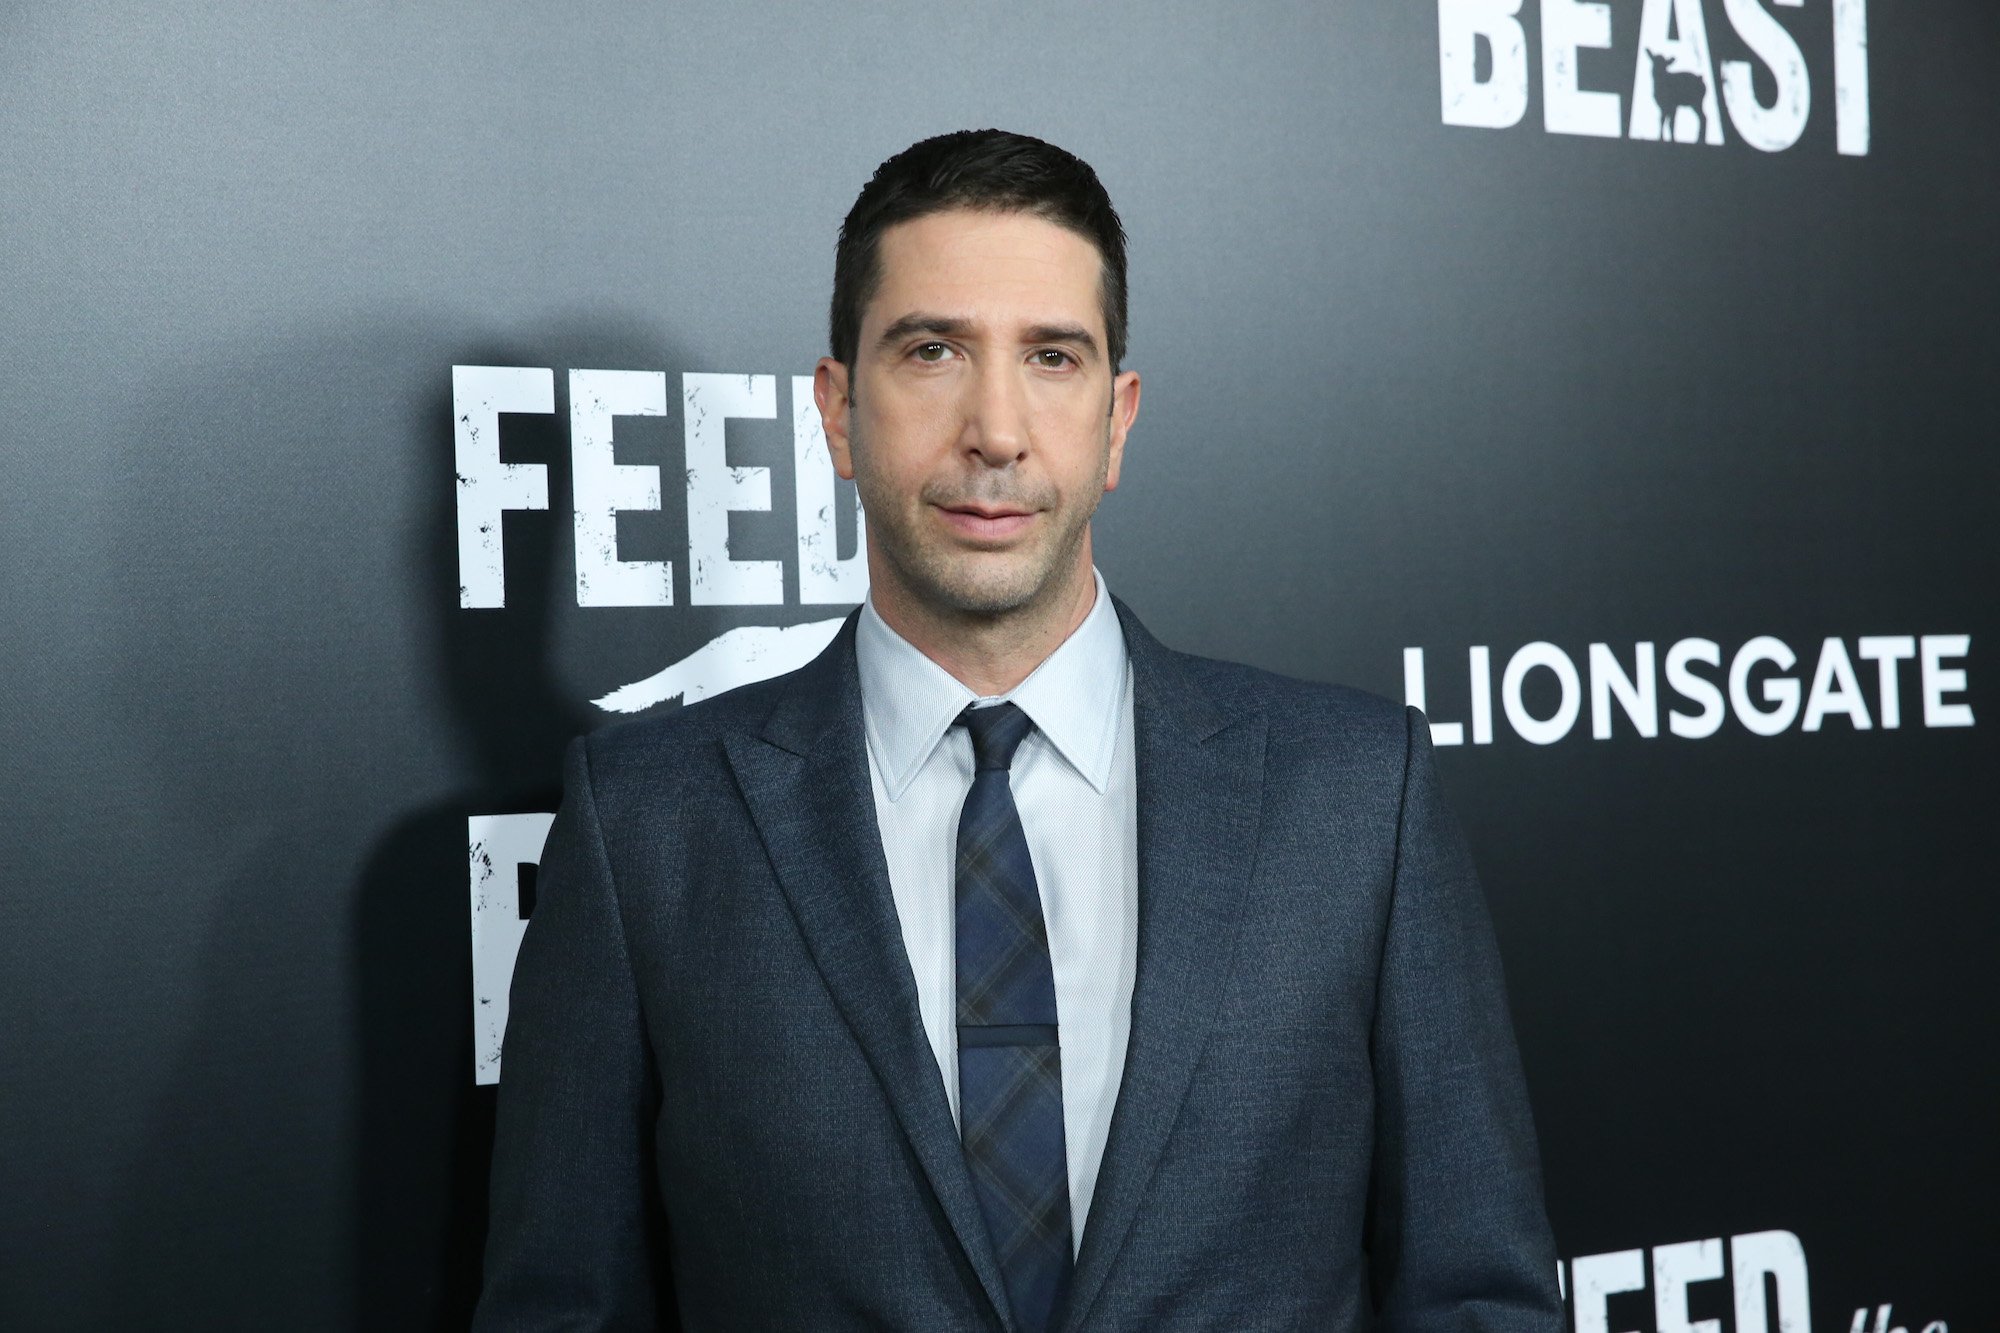 Friends' Actor David Schwimmer Hurt His Film Career Turning Down a Major Role in 'Men in Black'